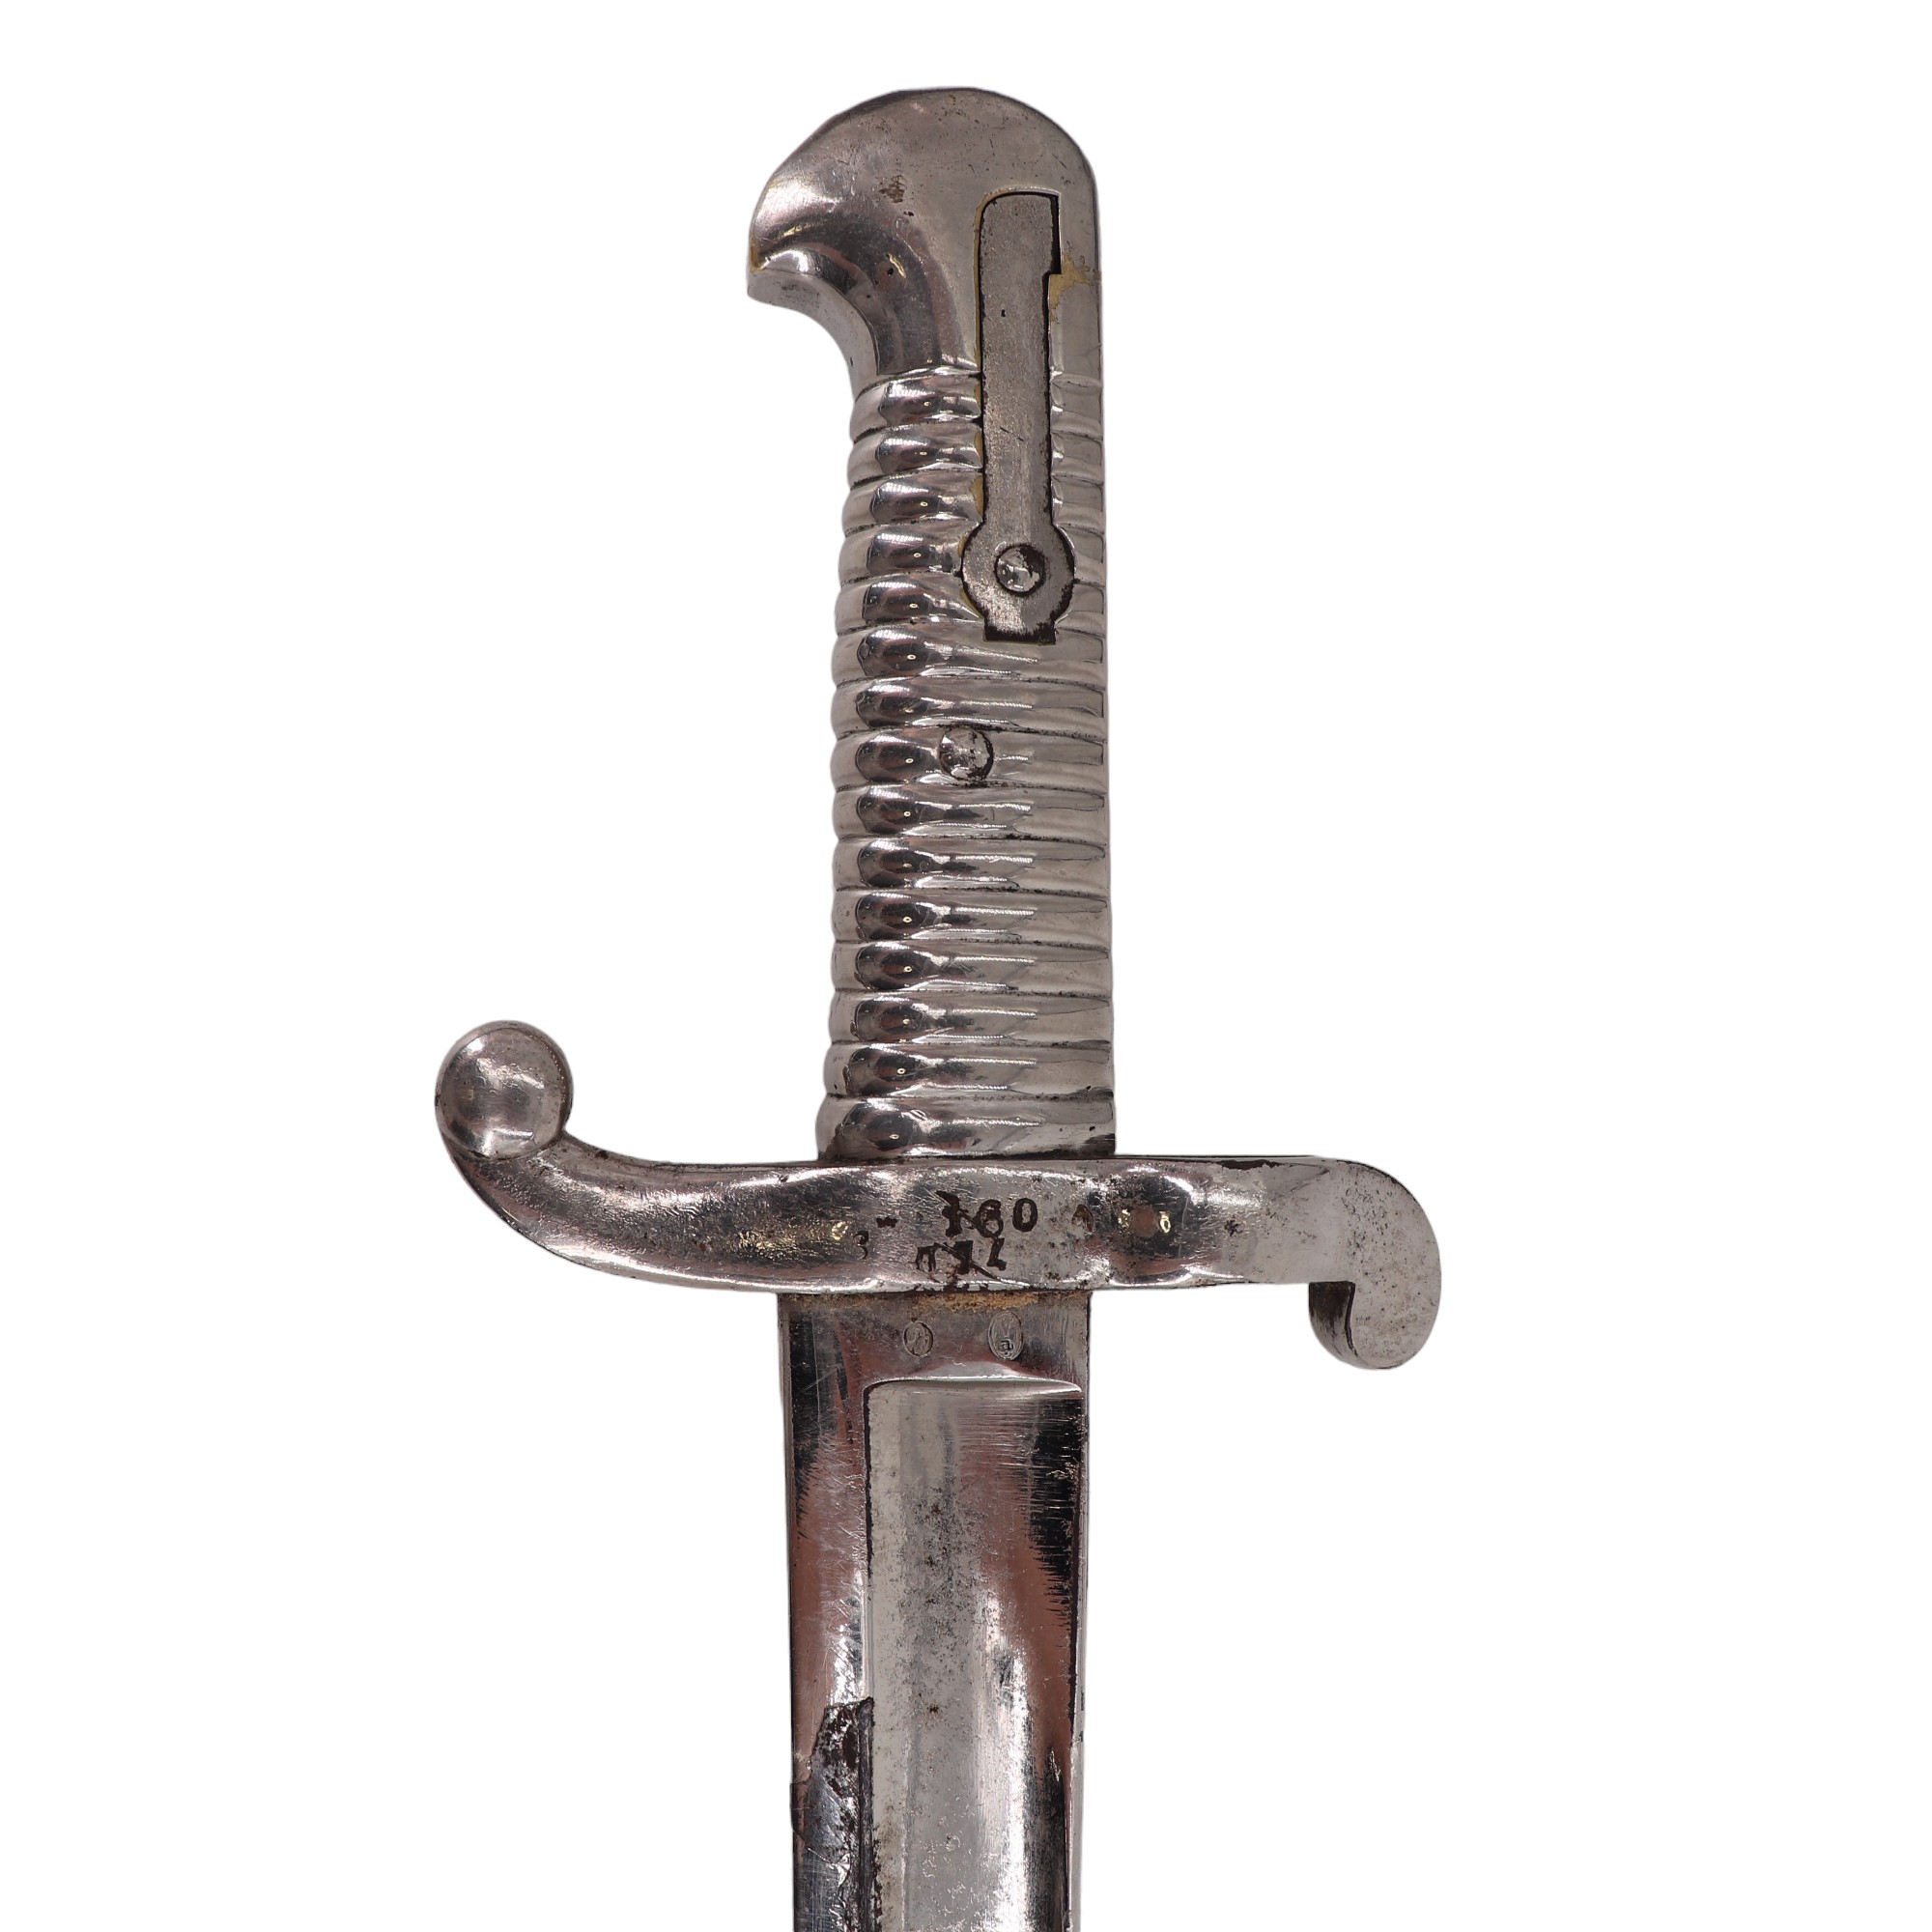 A French Mle 1842 bayonet, nickel plated and modified for cruciform wall display, together with an - Image 5 of 8